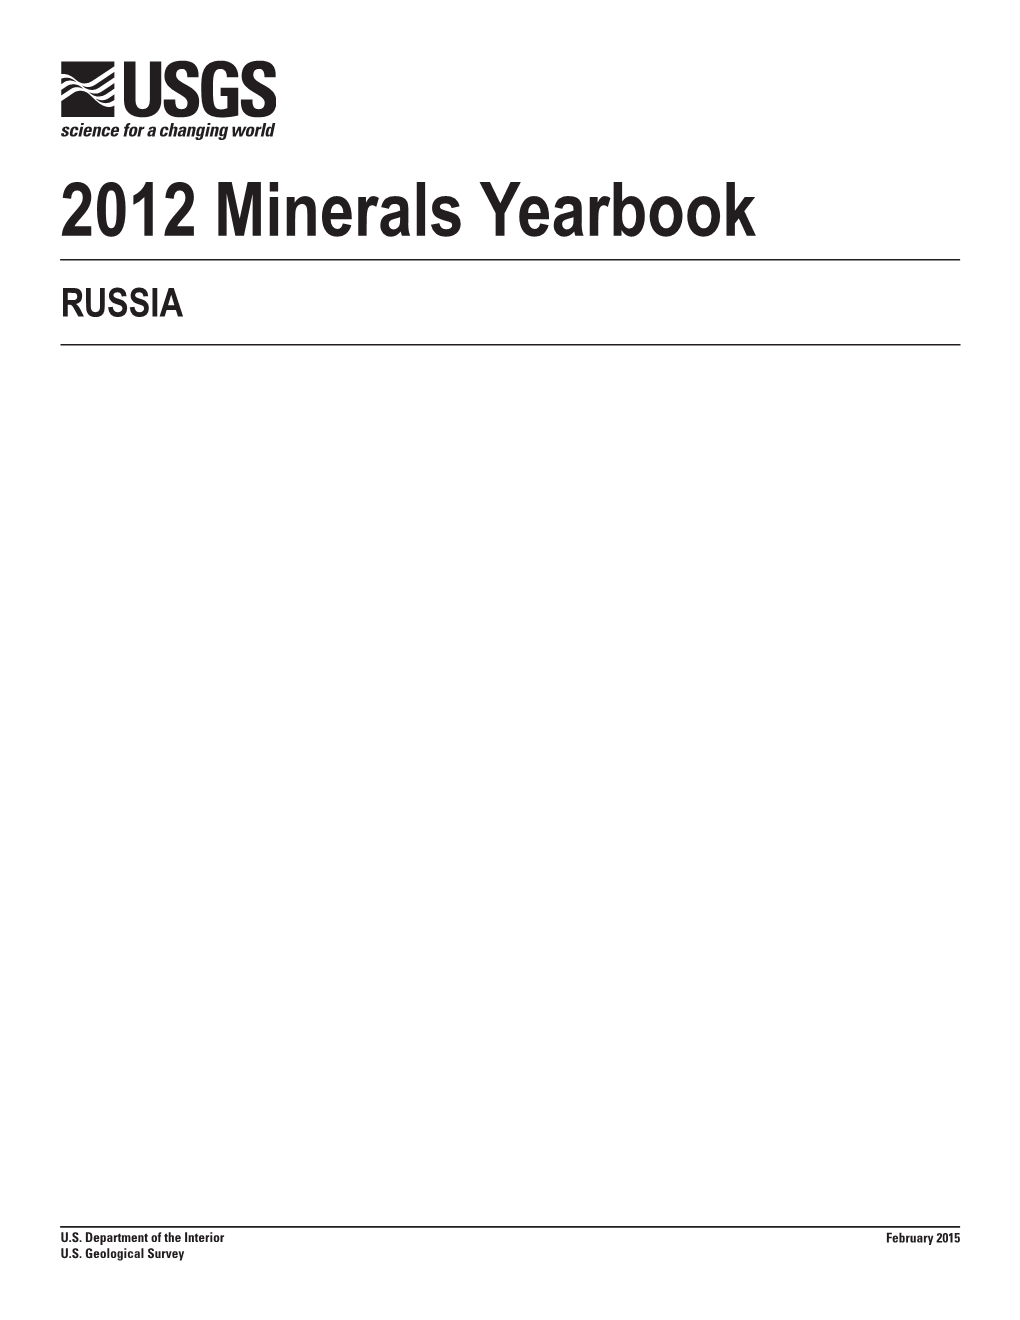 The Mineral Industry of Russia in 2012